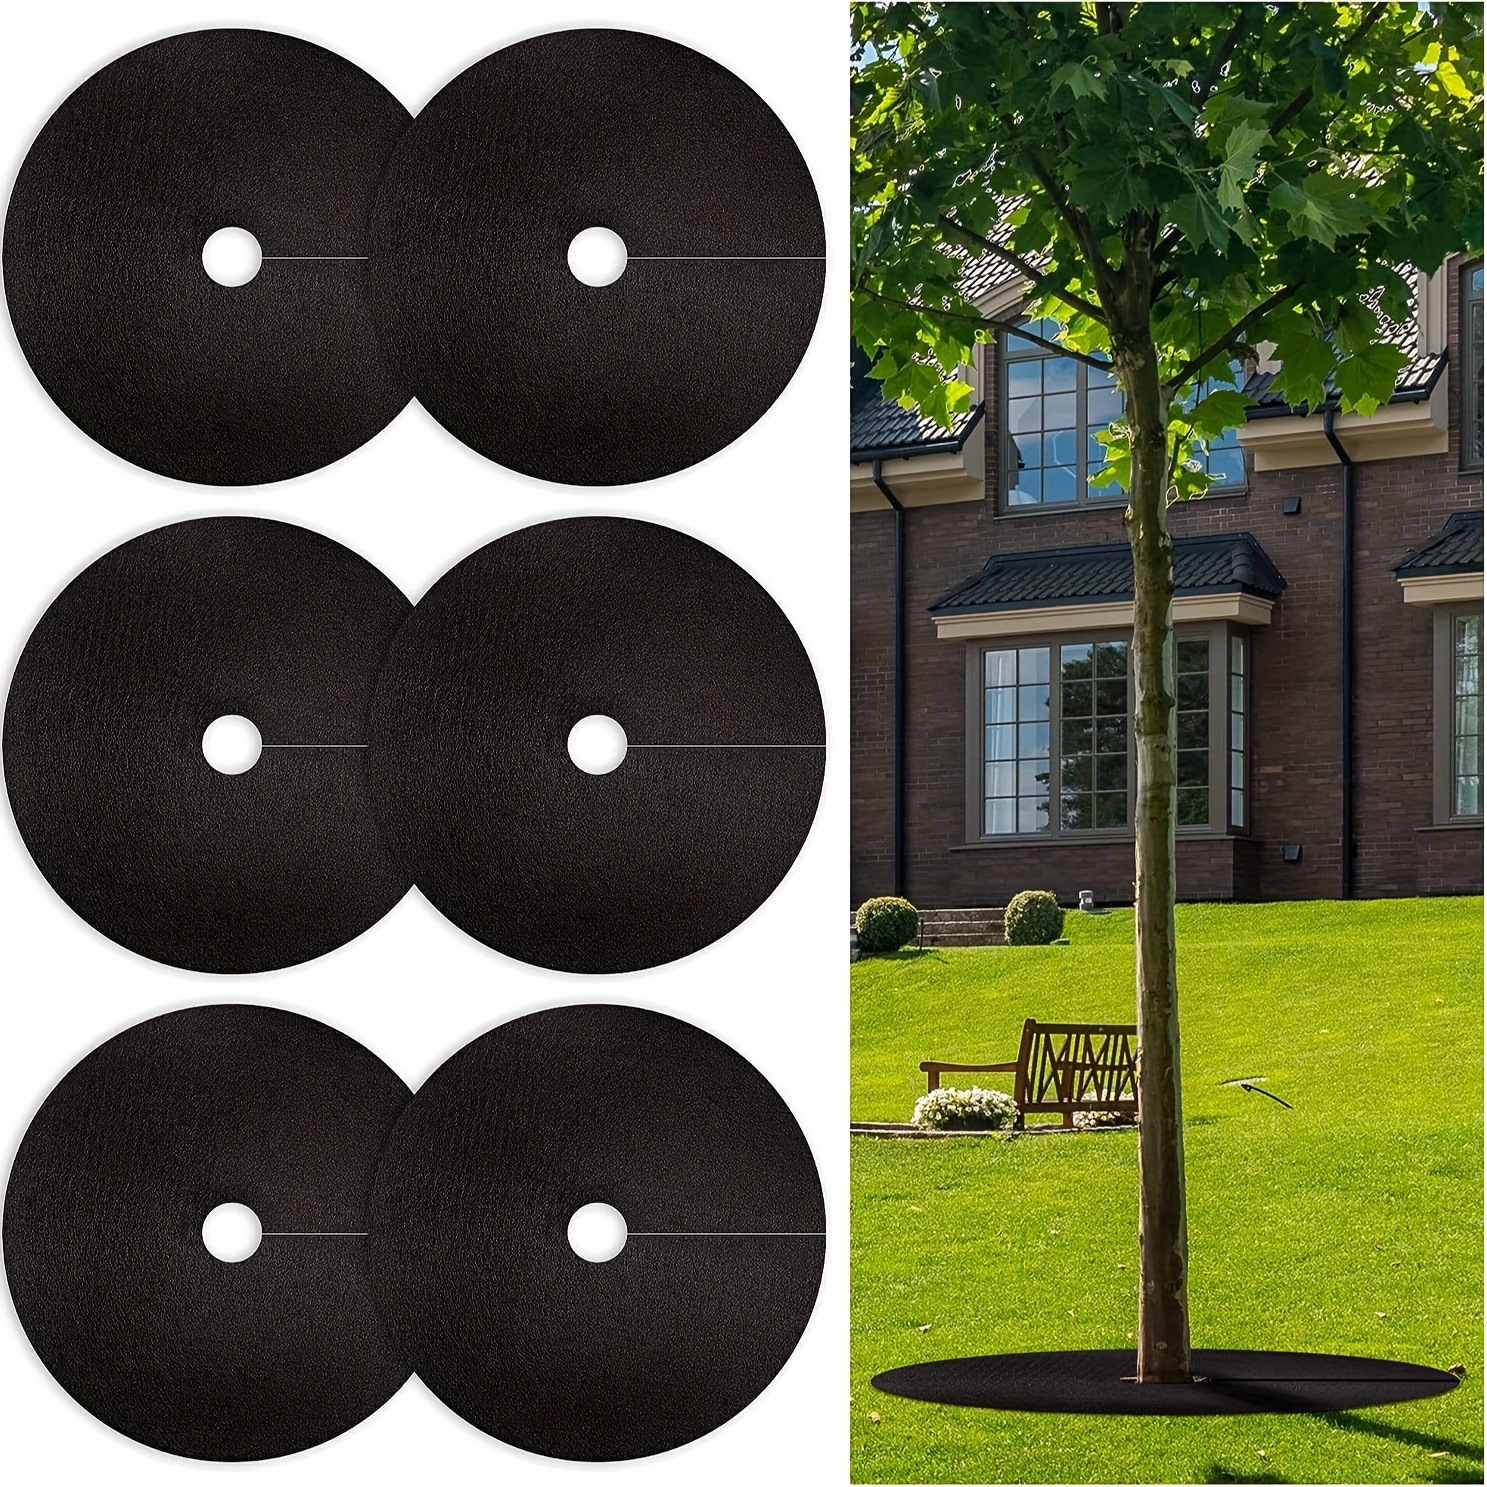 

6 Packs, Non-woven Fabric Tree Protection Pads, Reusable Tree And Barrier Pads, Used For Control And Root Protection, Suitable For Preventing Growth, Good For Estate Management